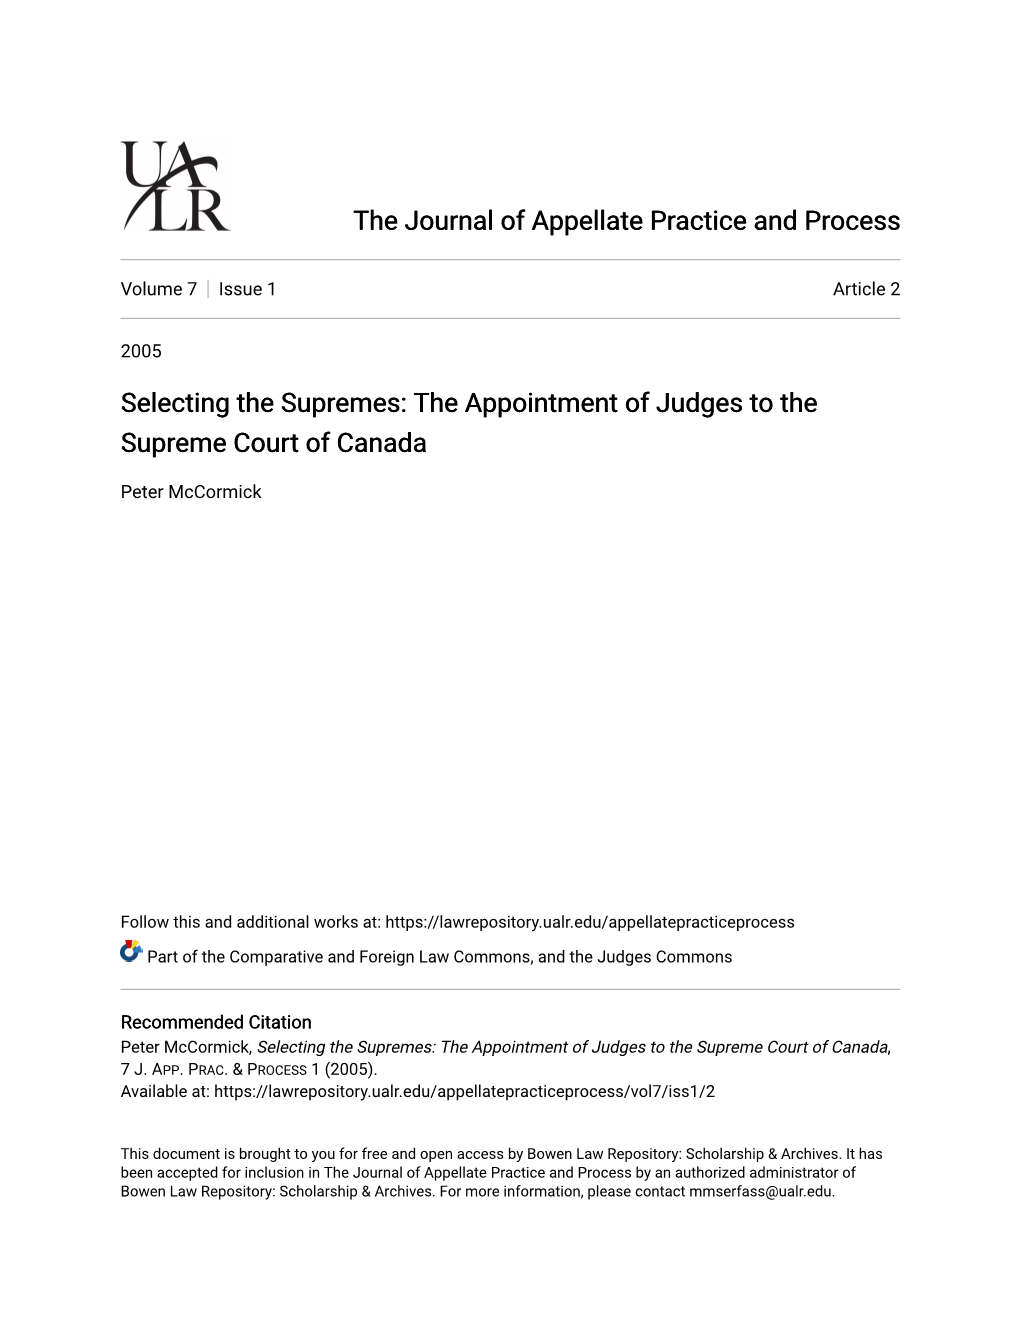 The Appointment of Judges to the Supreme Court of Canada